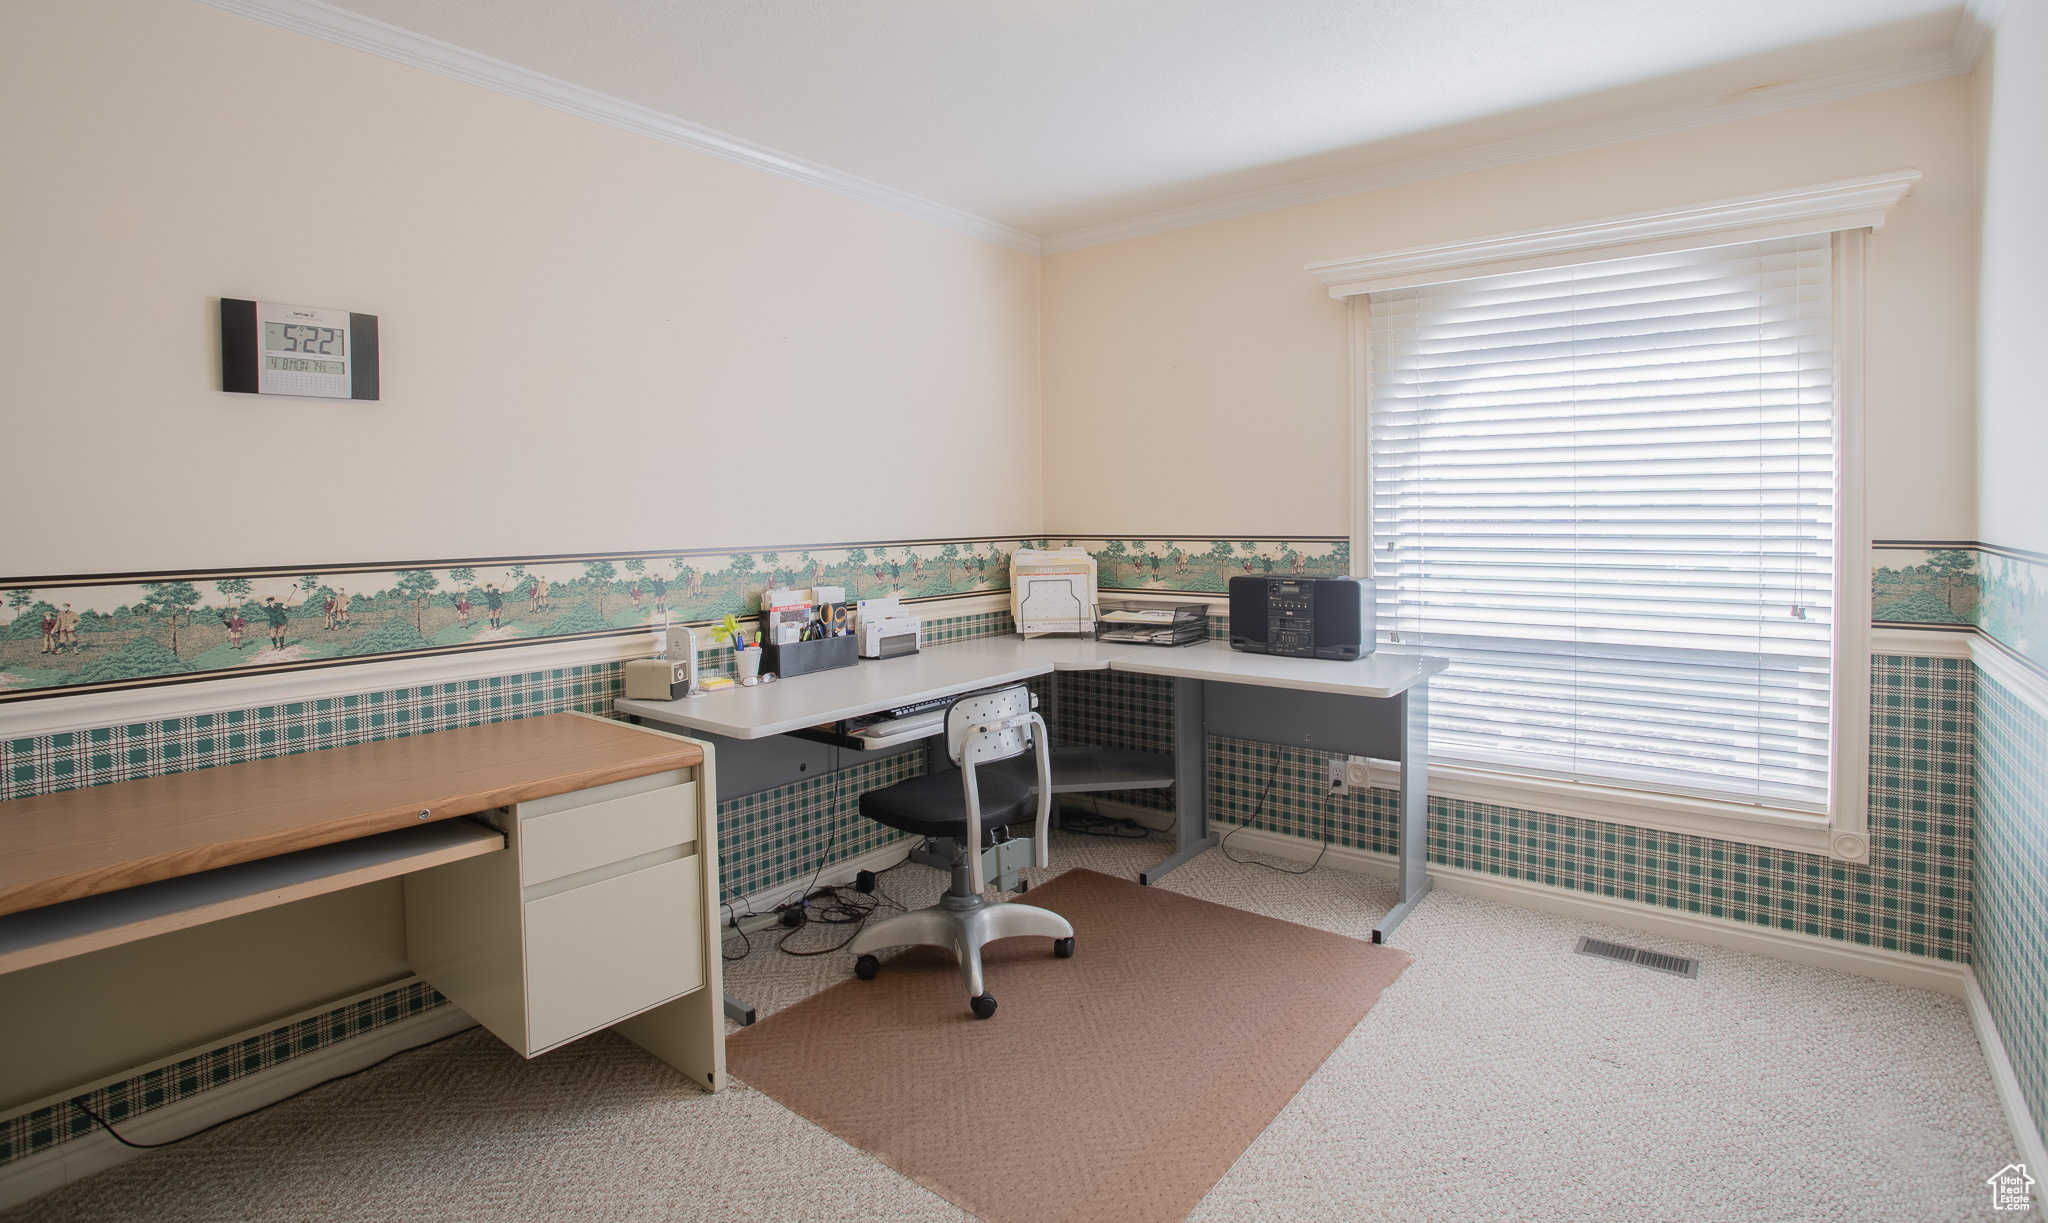 Carpeted office space with a healthy amount of sunlight and crown molding